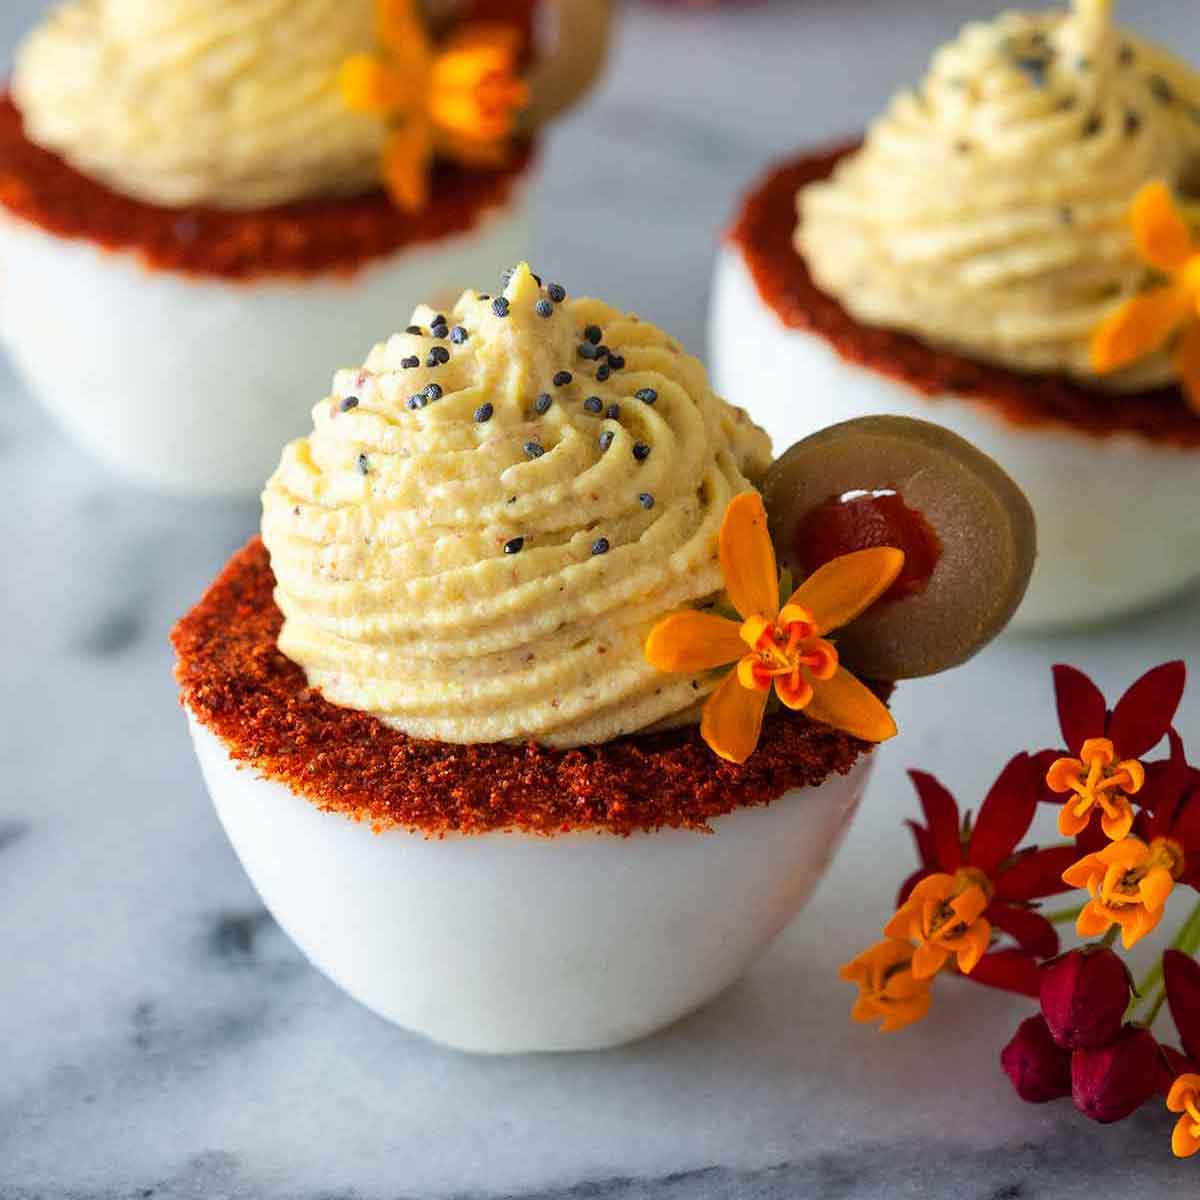 3 deviled eggs with spiced rims, garnished with olive slices and flowers.